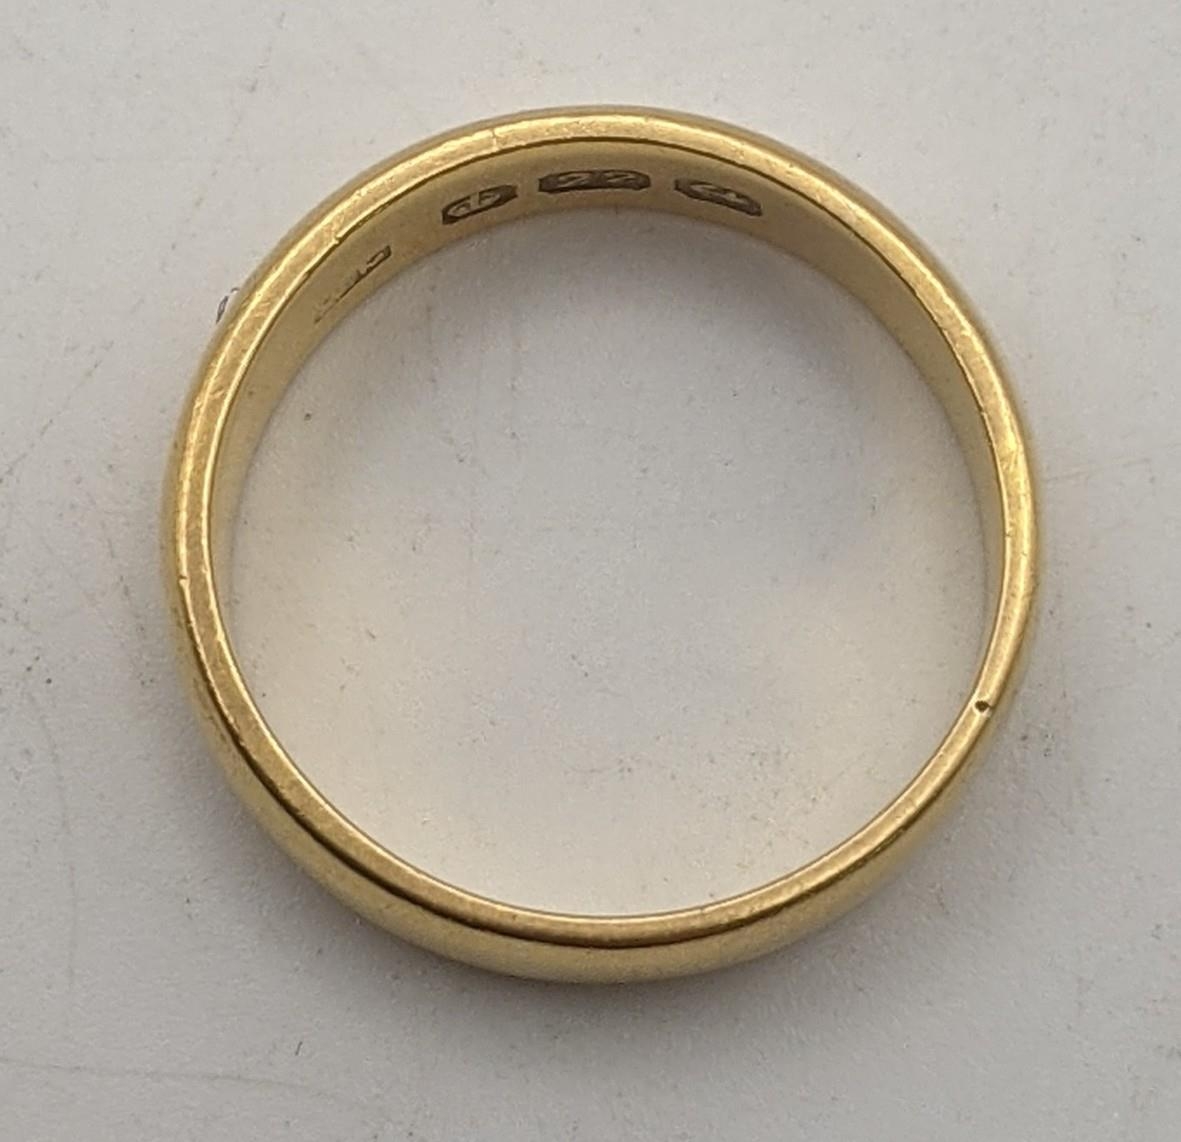 A 22ct gold wedding ring 5.1g Location: If there is no condition report shown, please request - Image 2 of 2